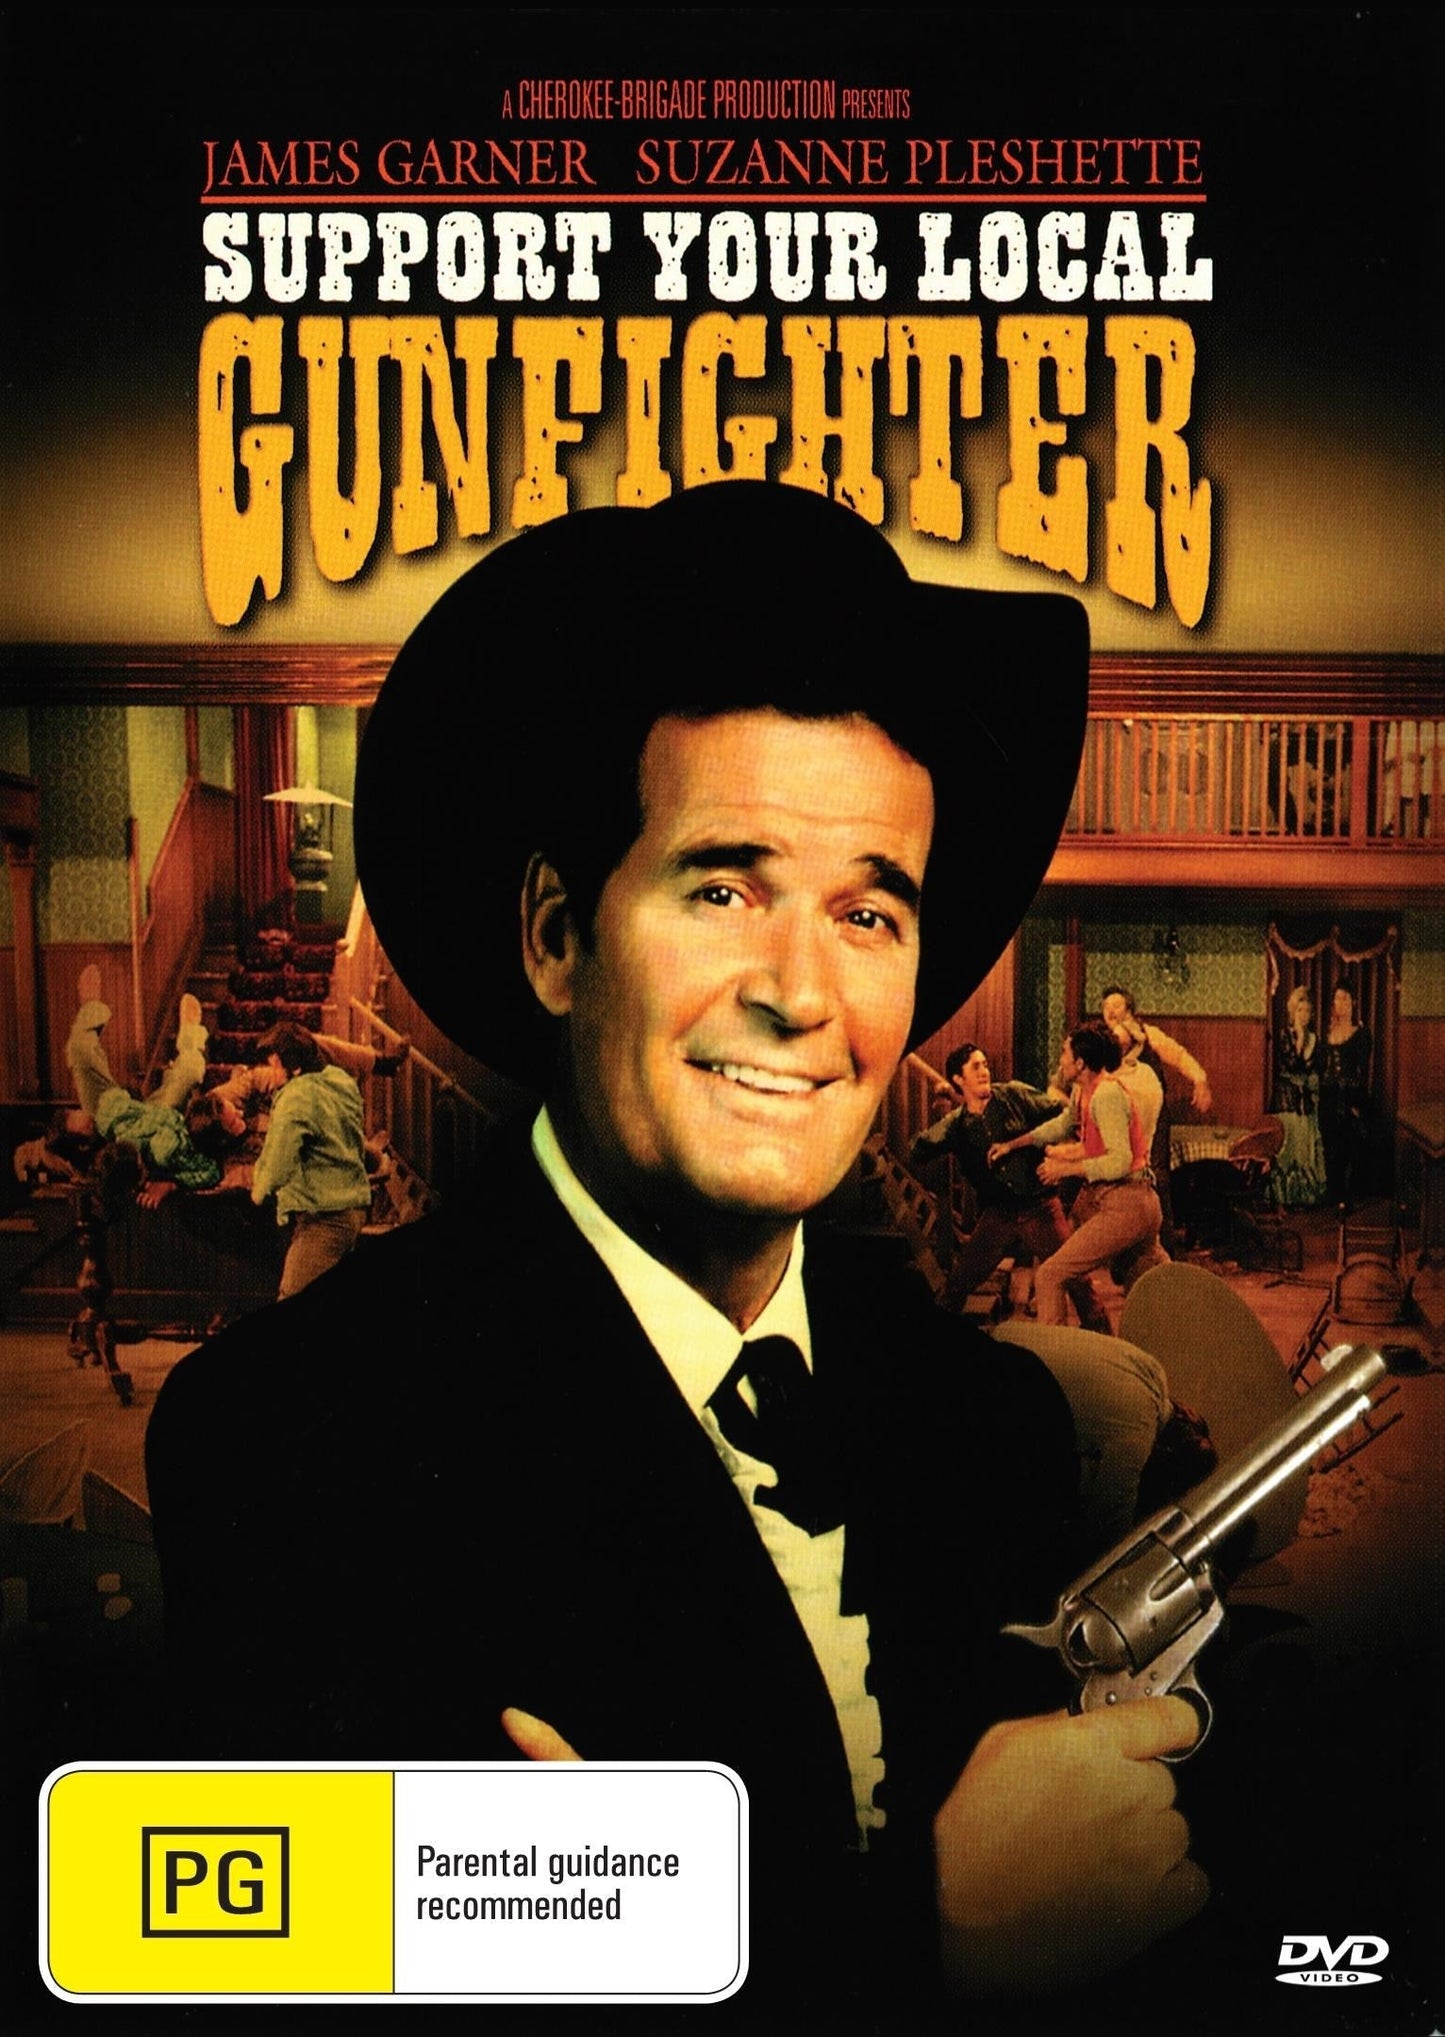 Support Your Local Gunfighter rareandcollectibledvds